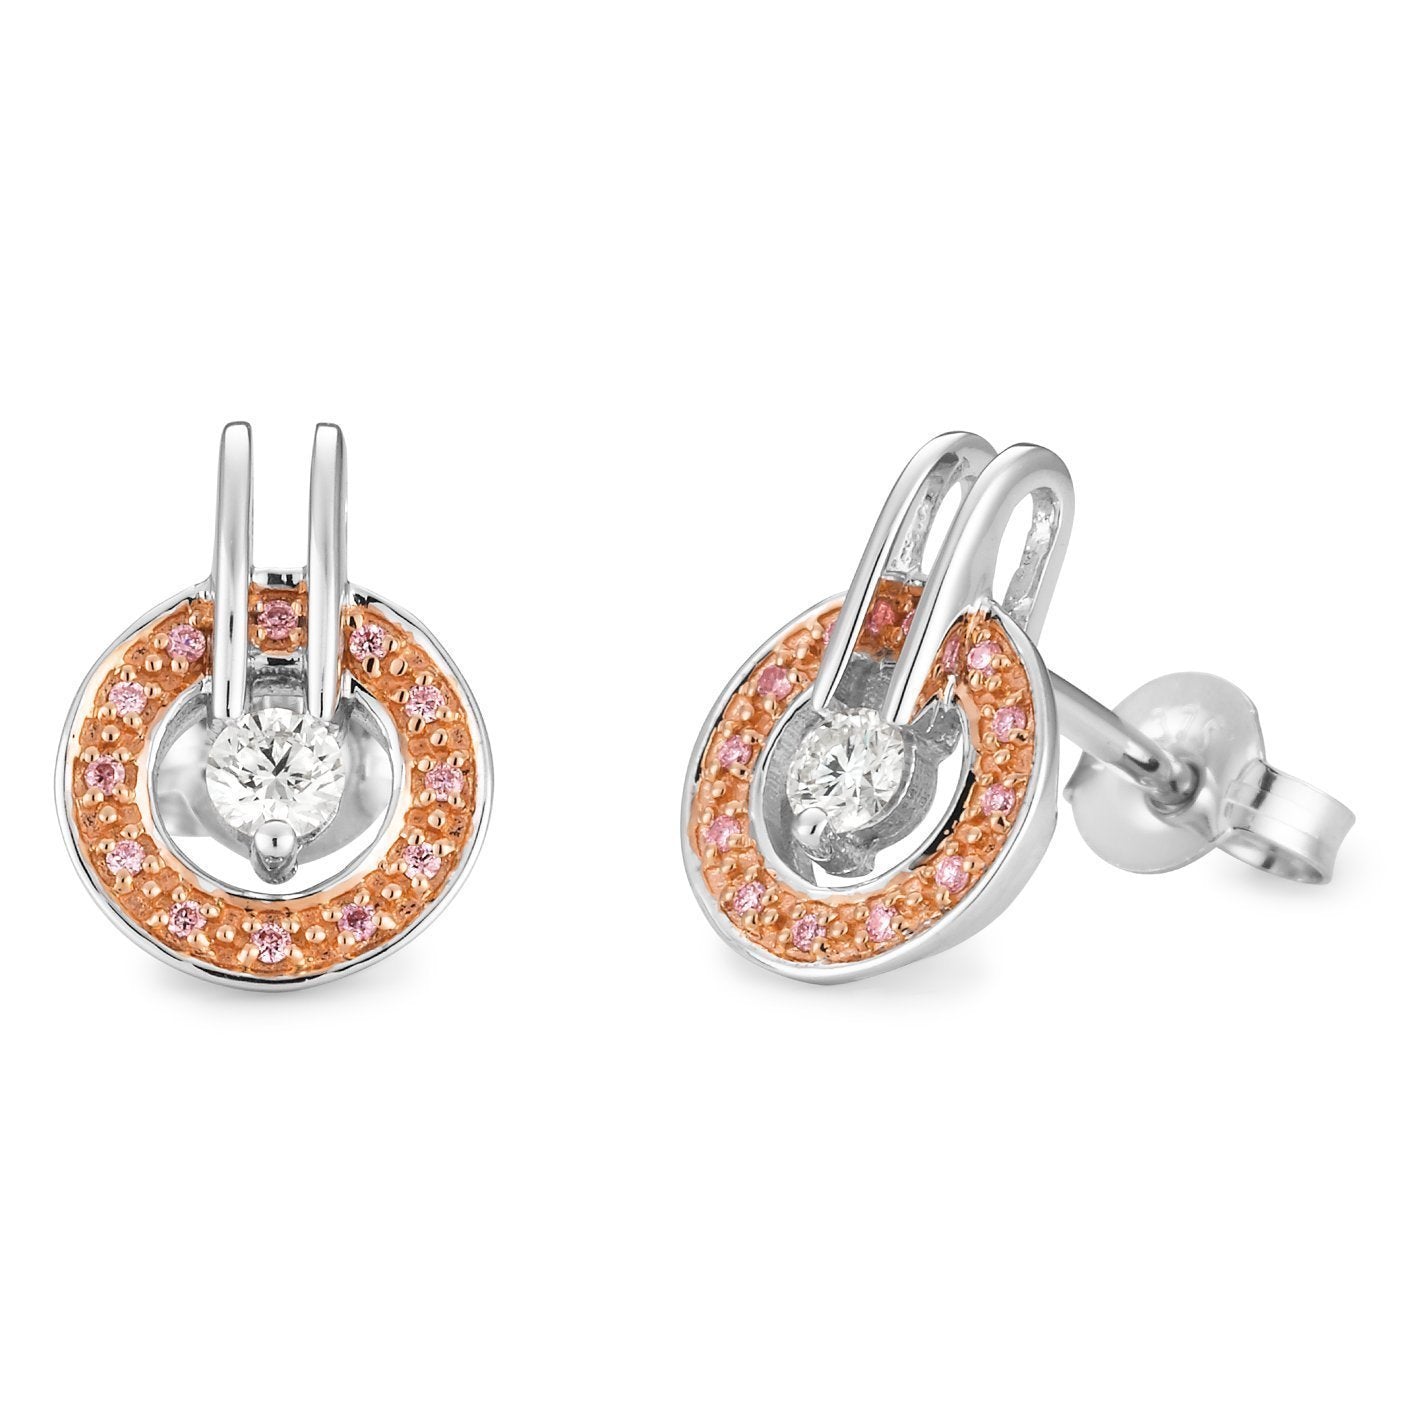 PINK CAVIAR 0.26ct Pink Diamond Earrings in 9ct White & Rose Gold